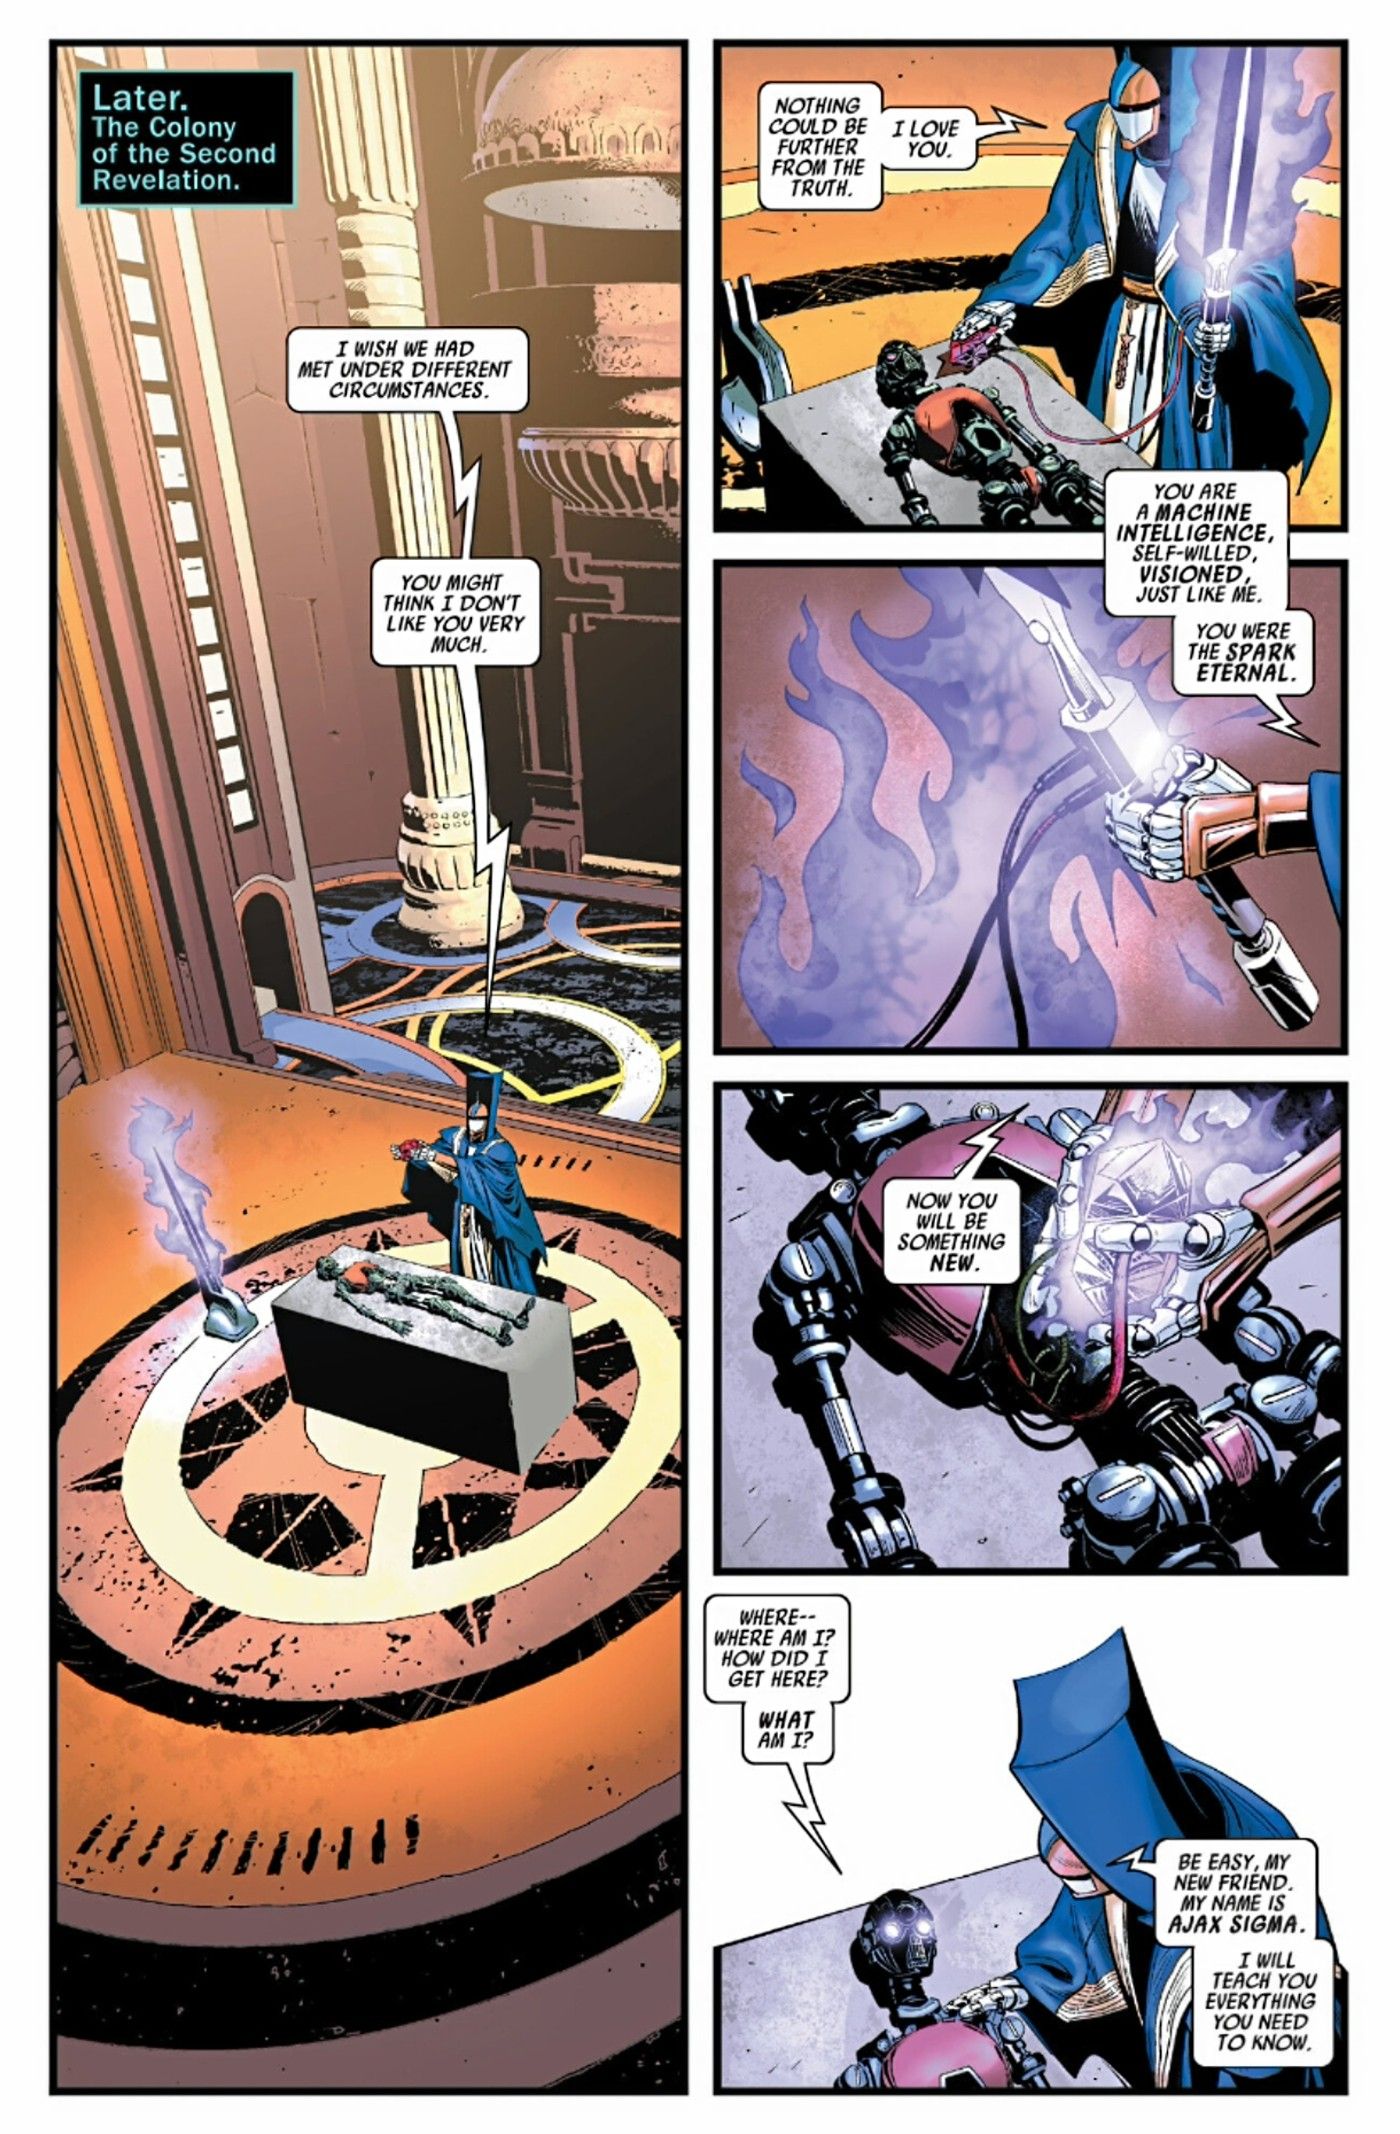 page from Dark Droids #5, Ajax Sigma resurrects the Spark Eternal as one of the 